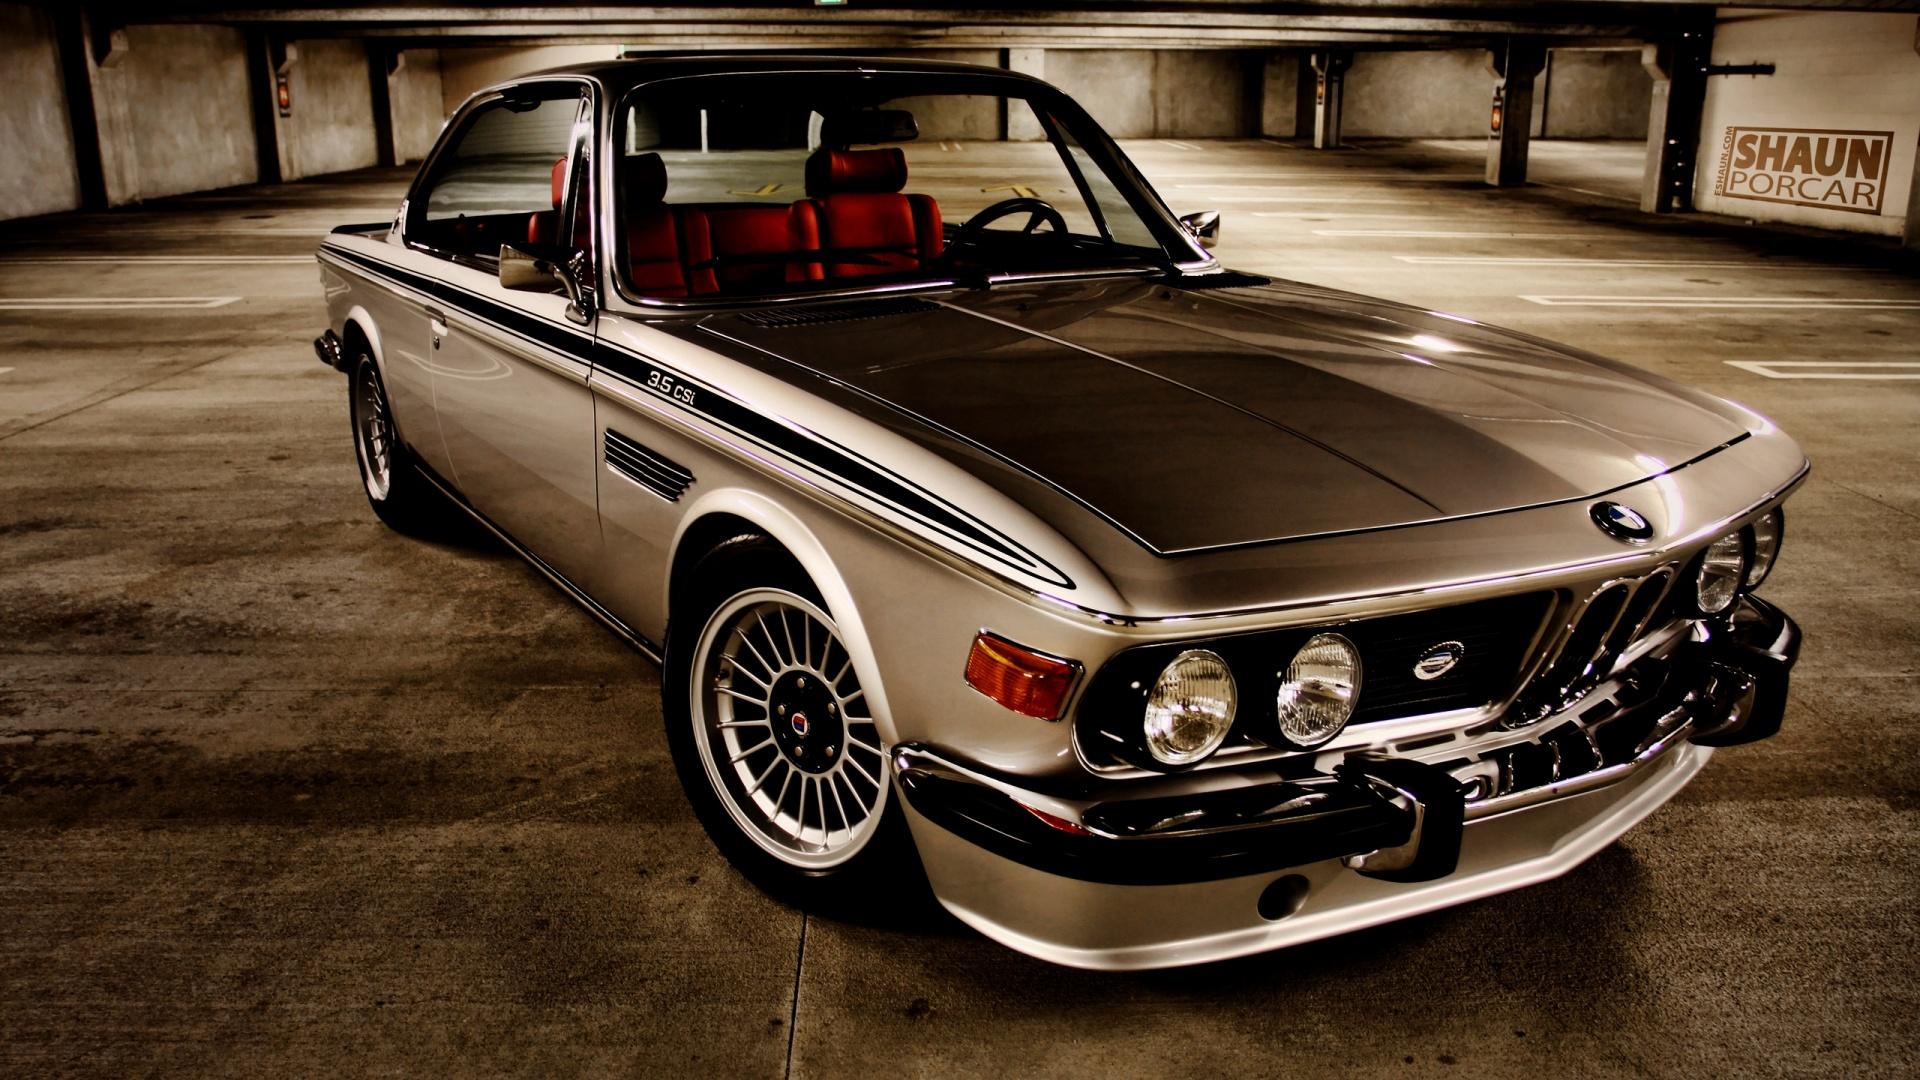 Old BMW Car Free Wallpapers 1743 - HD Wallpaper Site